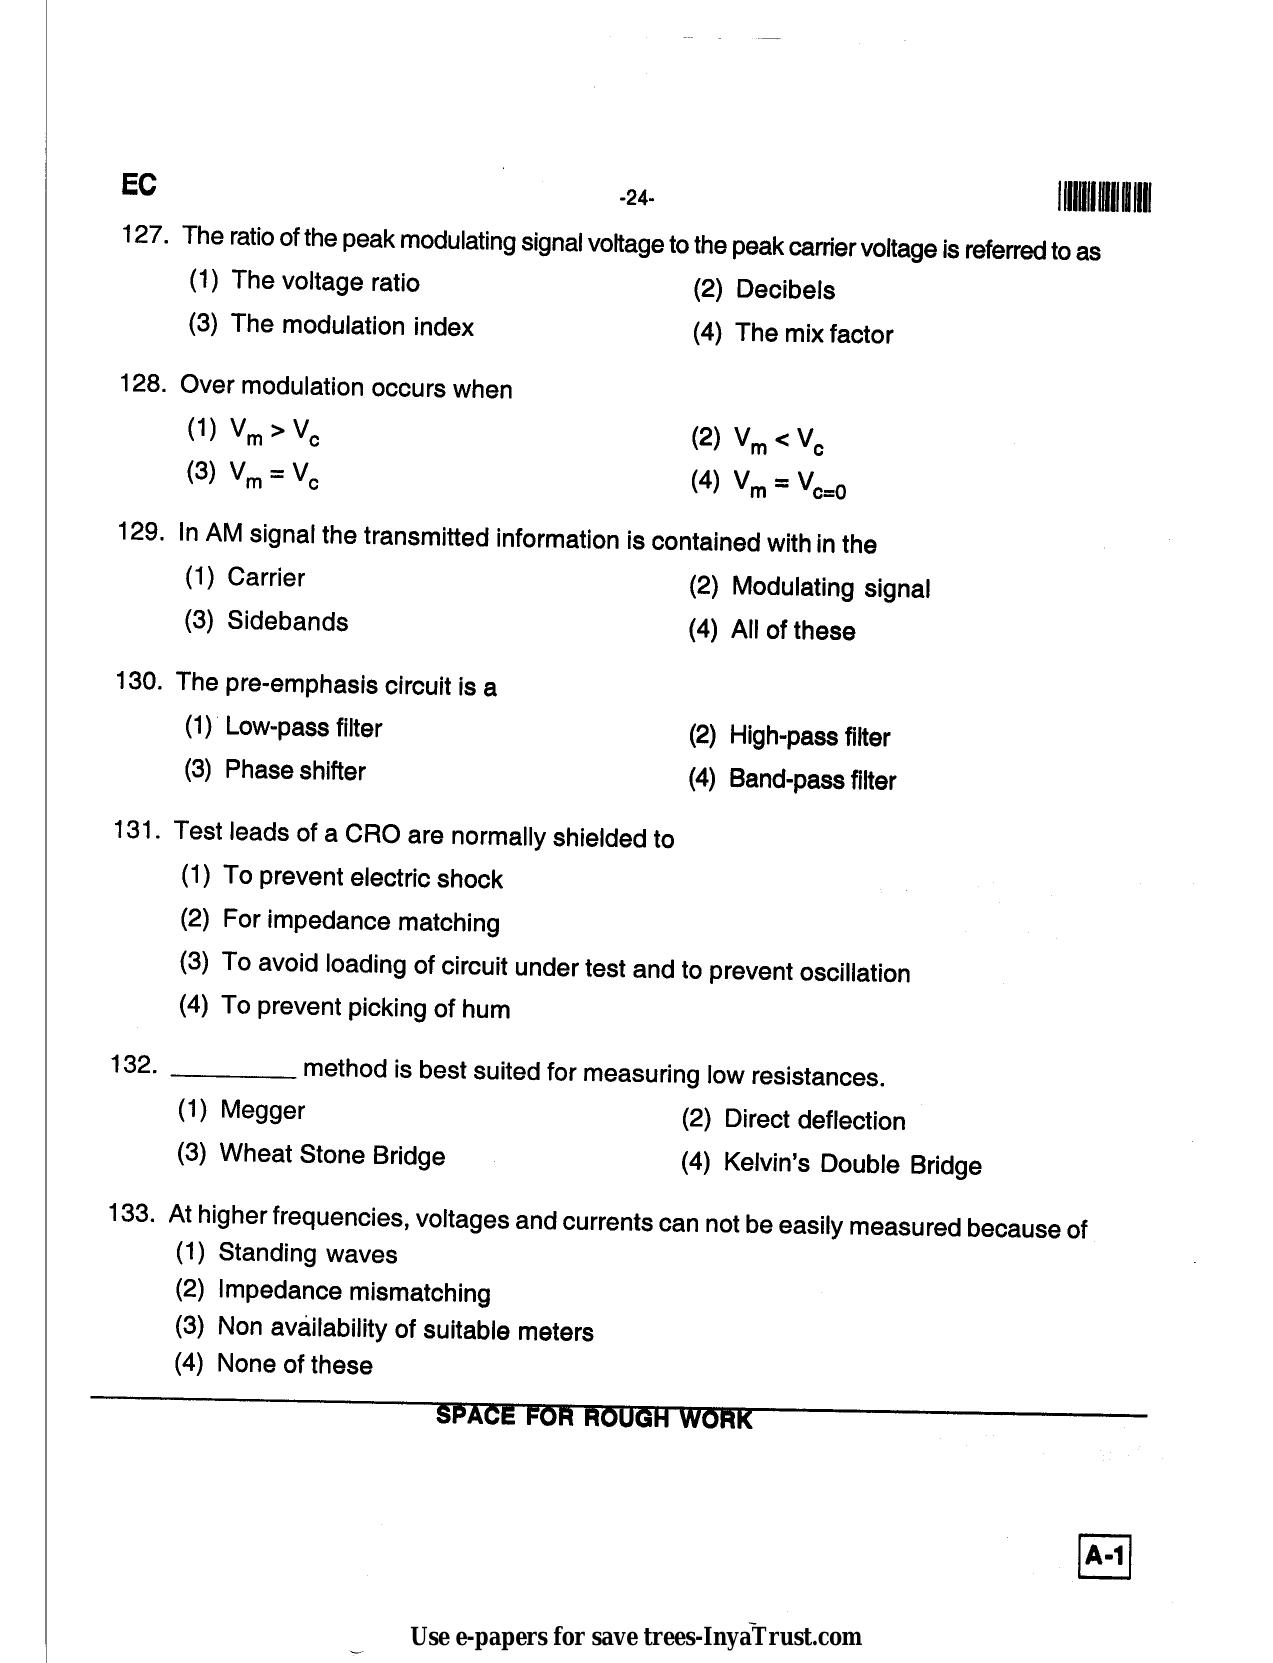 Karnataka Diploma CET- 2013 Electronics and Communication Engineering Question Paper - Page 24